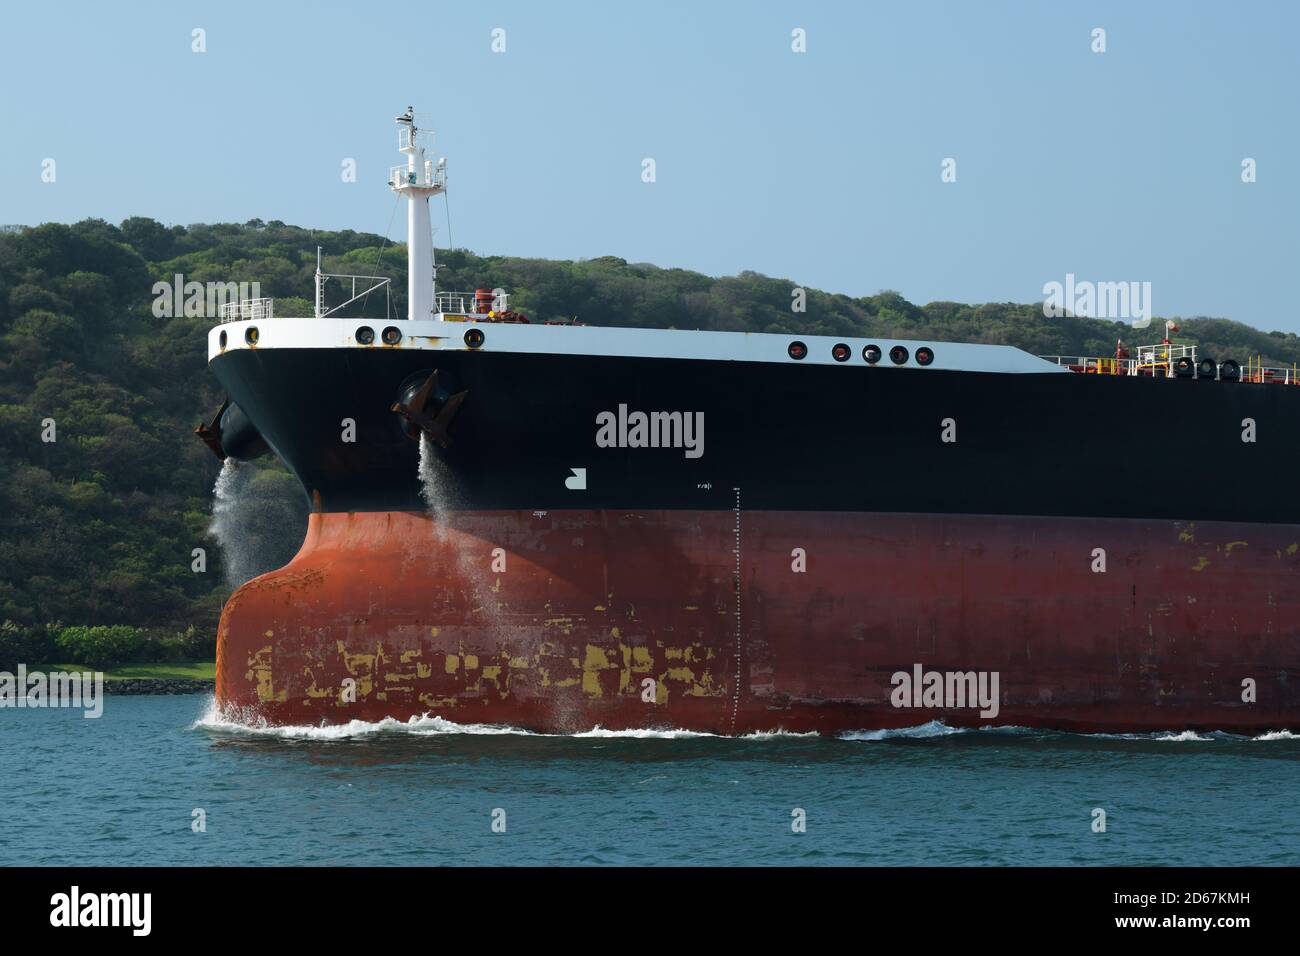 Transport, bow of cargo ship leaving harbour, motion, Durban, South Africa, commercial shipping, abstract, backgrounds, illustration, conceptual Stock Photo